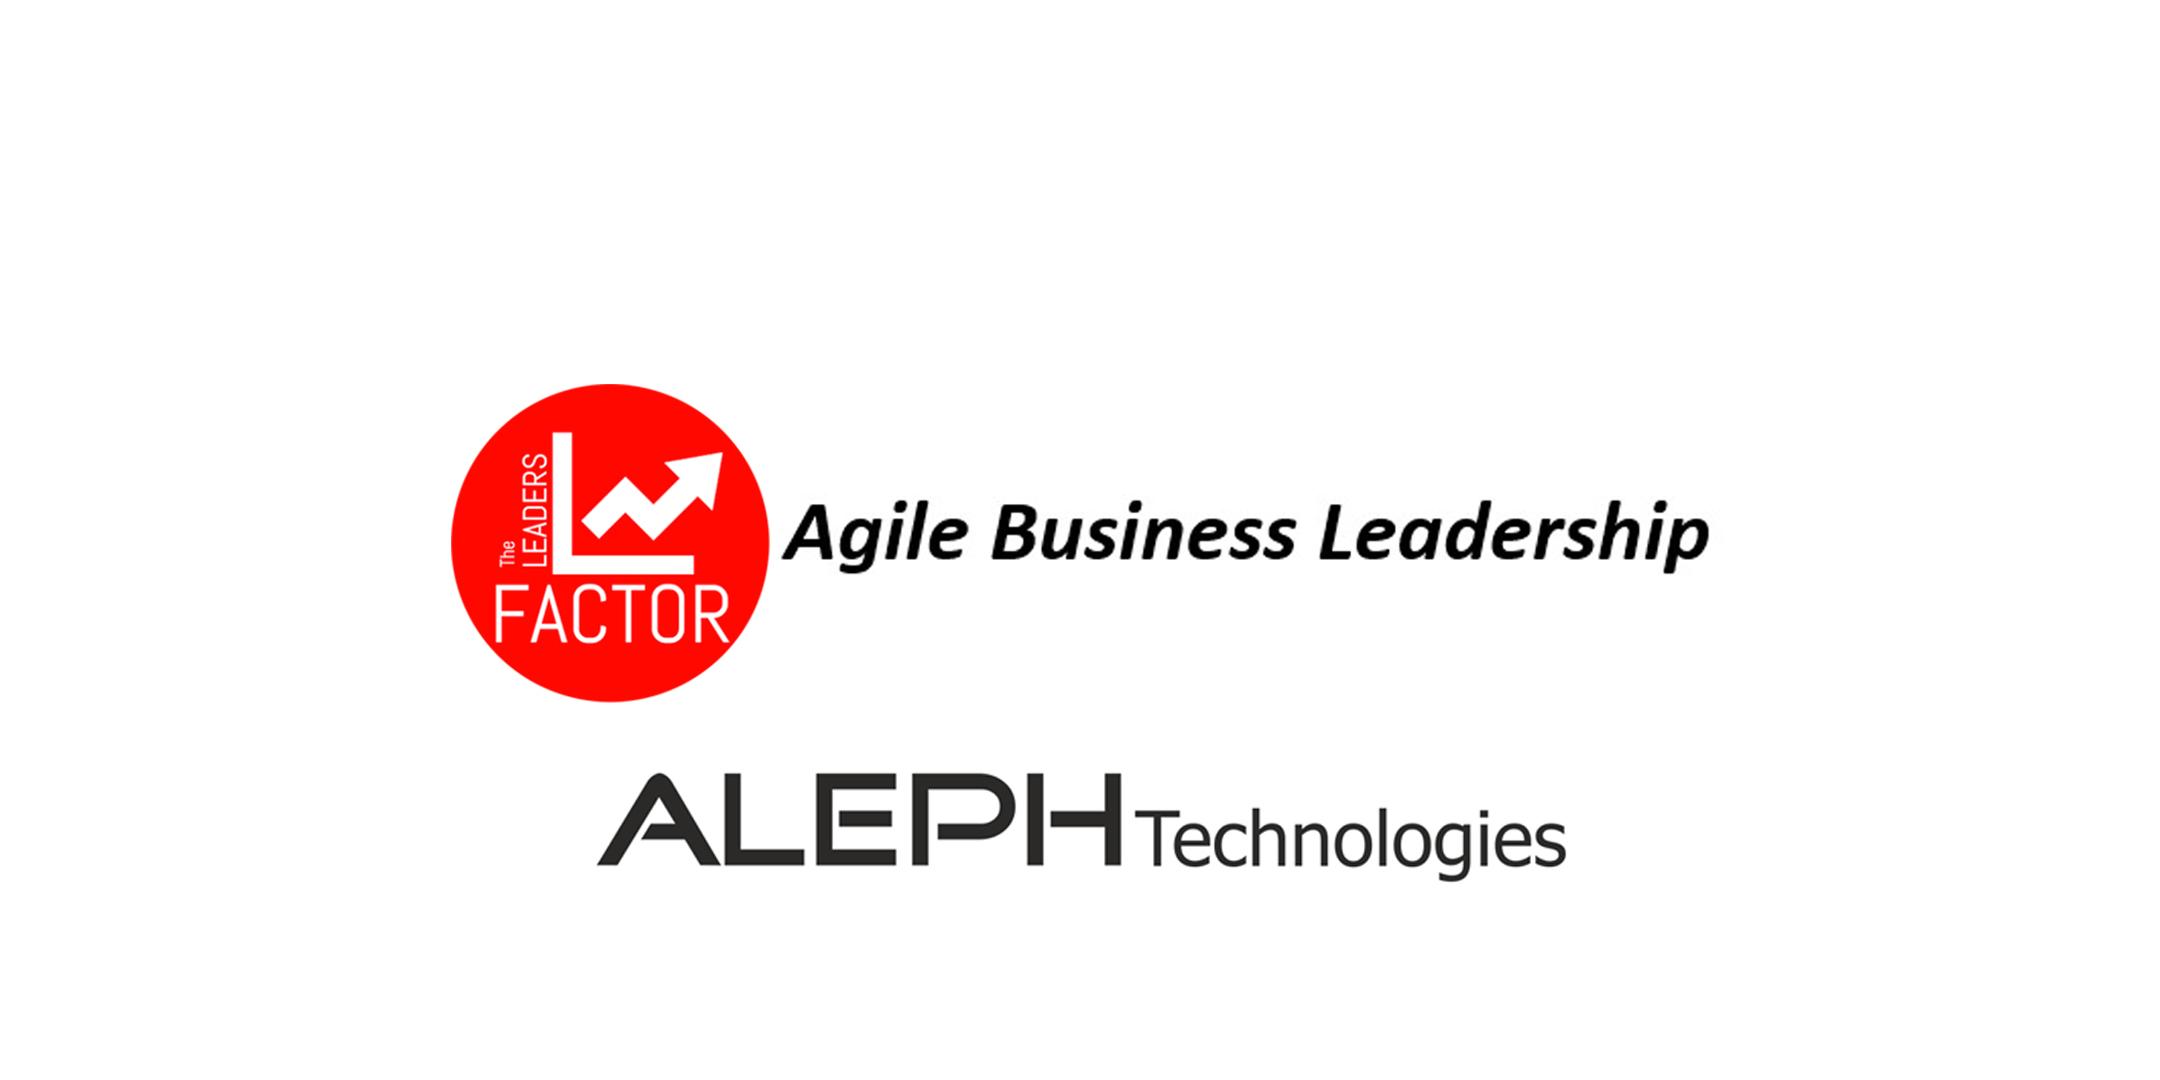 The Leaders Factor - Agile Business Leadership Workshop (April 4th - 5th)